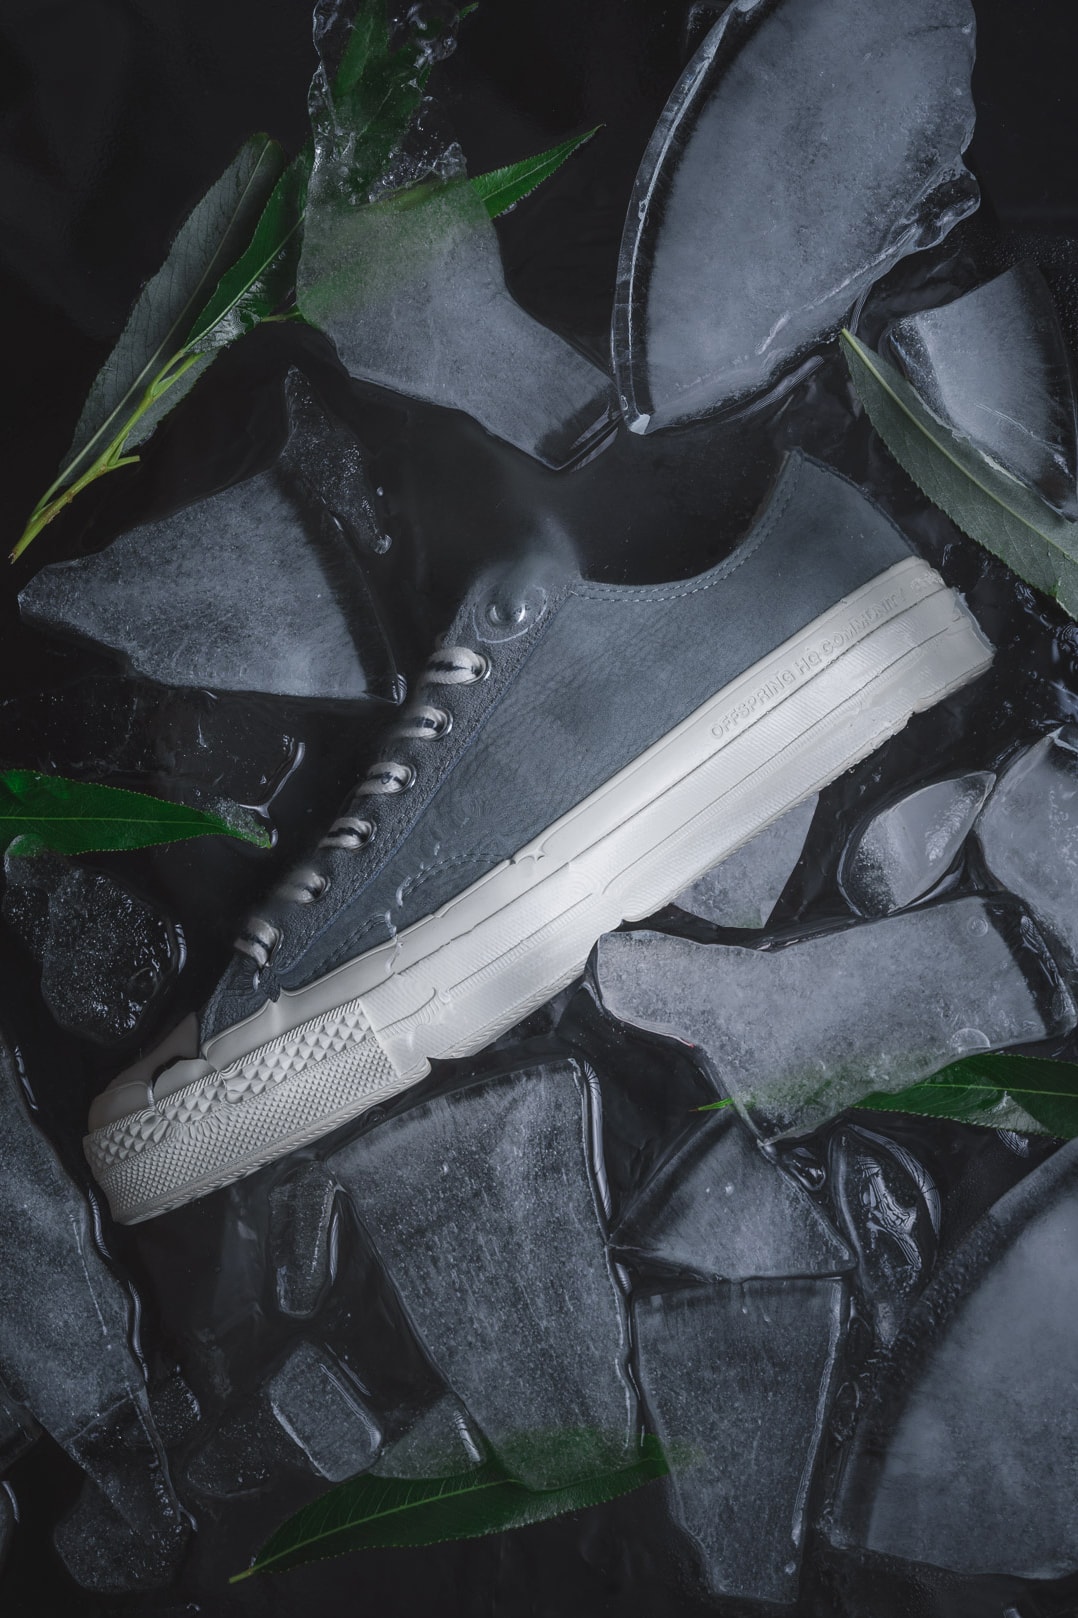 Offspring x Converse "Community Chuck 70s" PArt II Pack High Top Low Sneaker Release Information United Kingdom UK Store Limited Edition Collaboration Grey Muted Leather Nubuck All Star Lightning Bolt